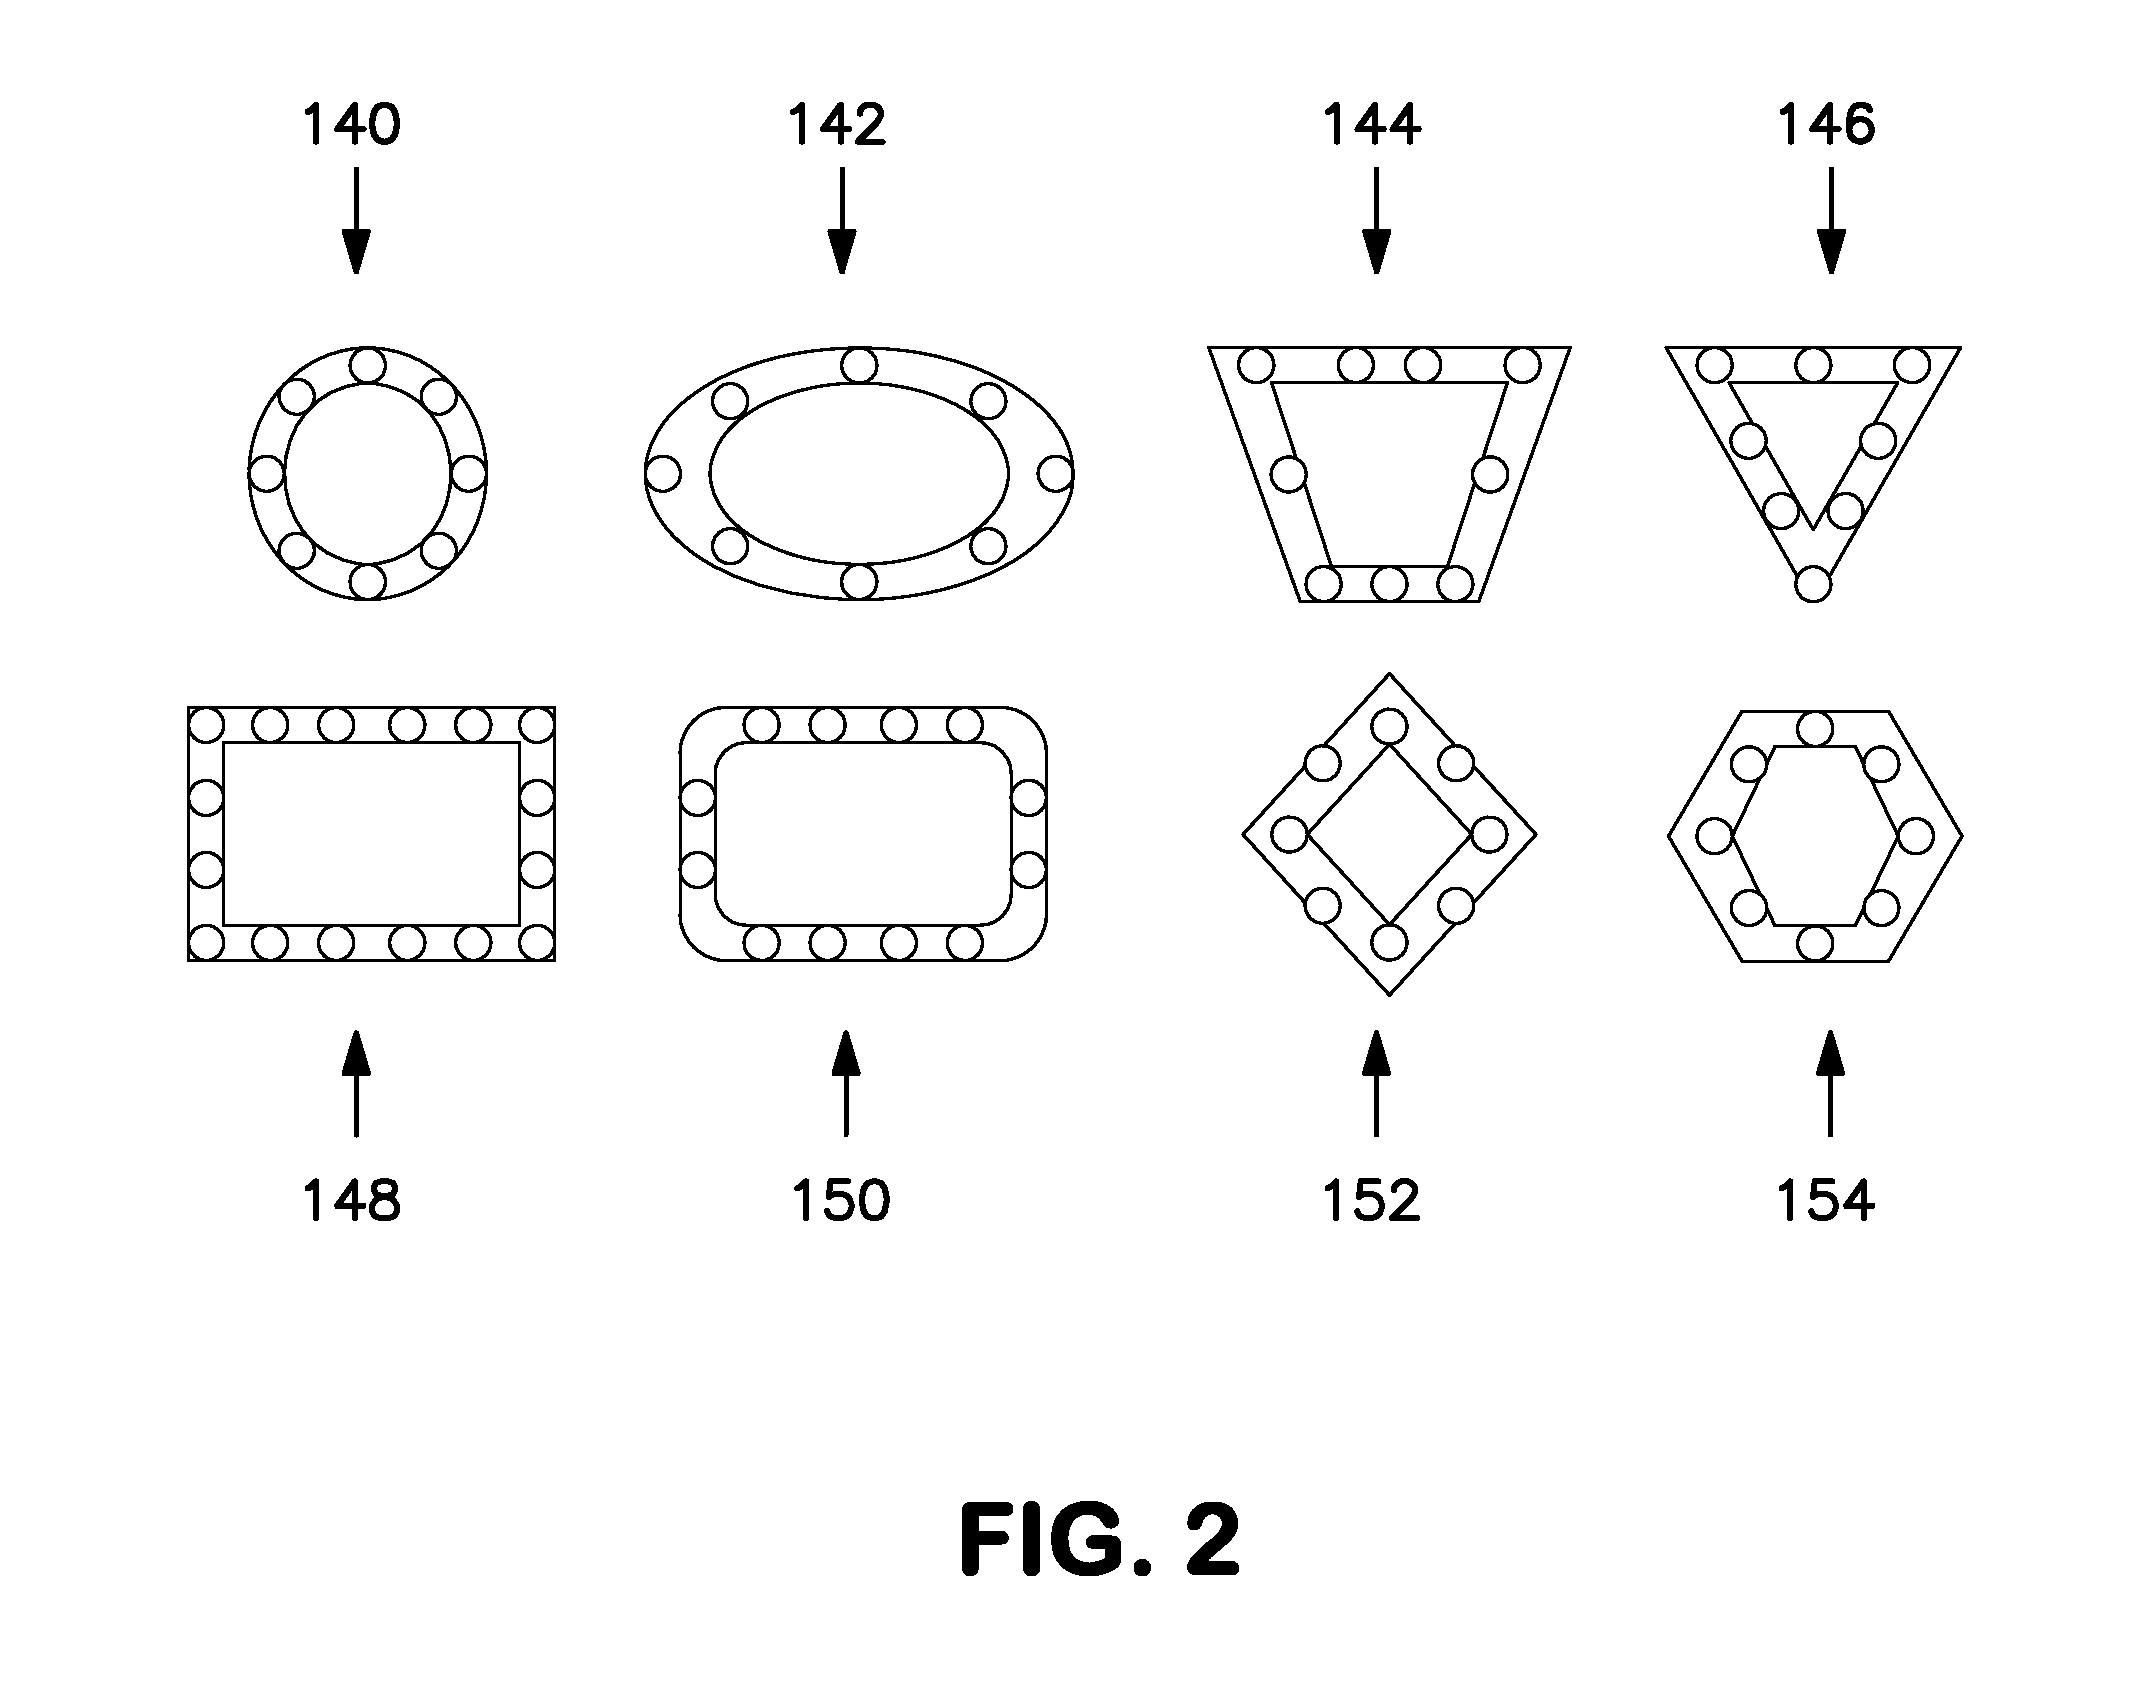 Filter element attachment, filter cartridge, and filter system